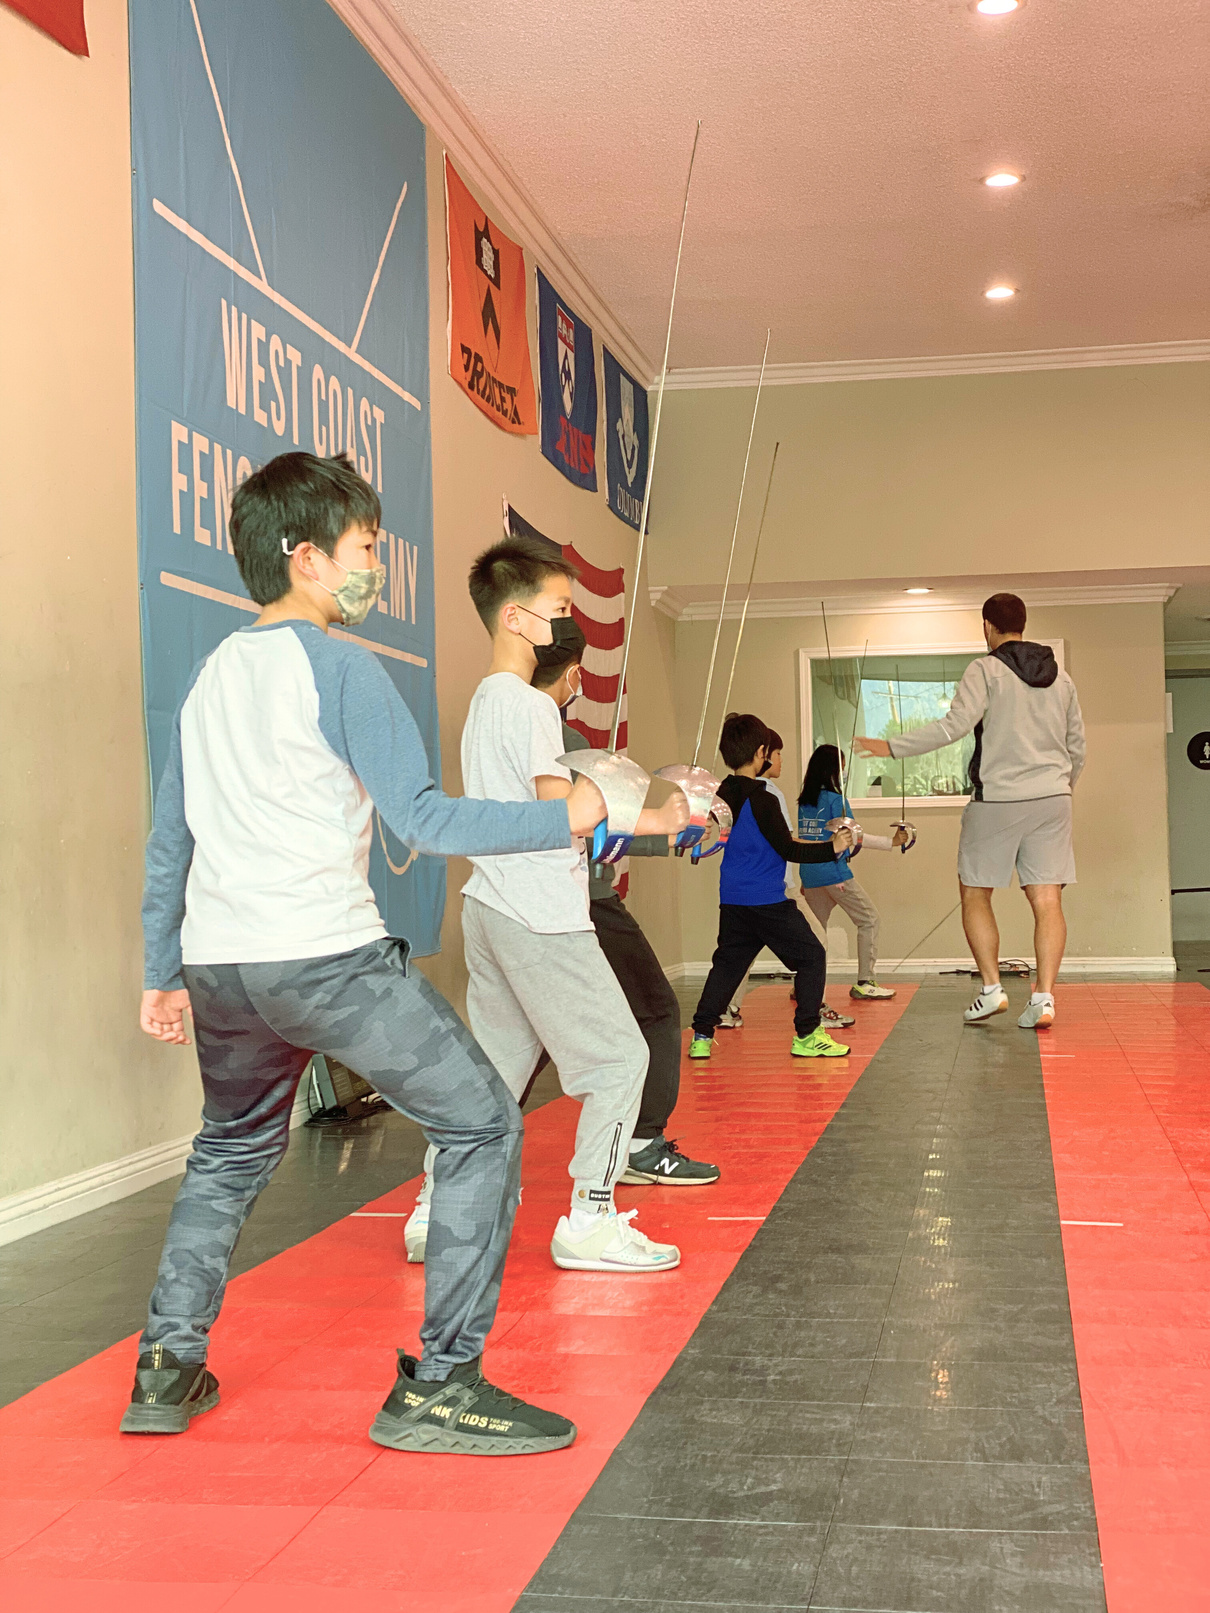 A group of pre teen kids in beginners saber fencing class at west coast fencing academy in engarde position with saber in hand